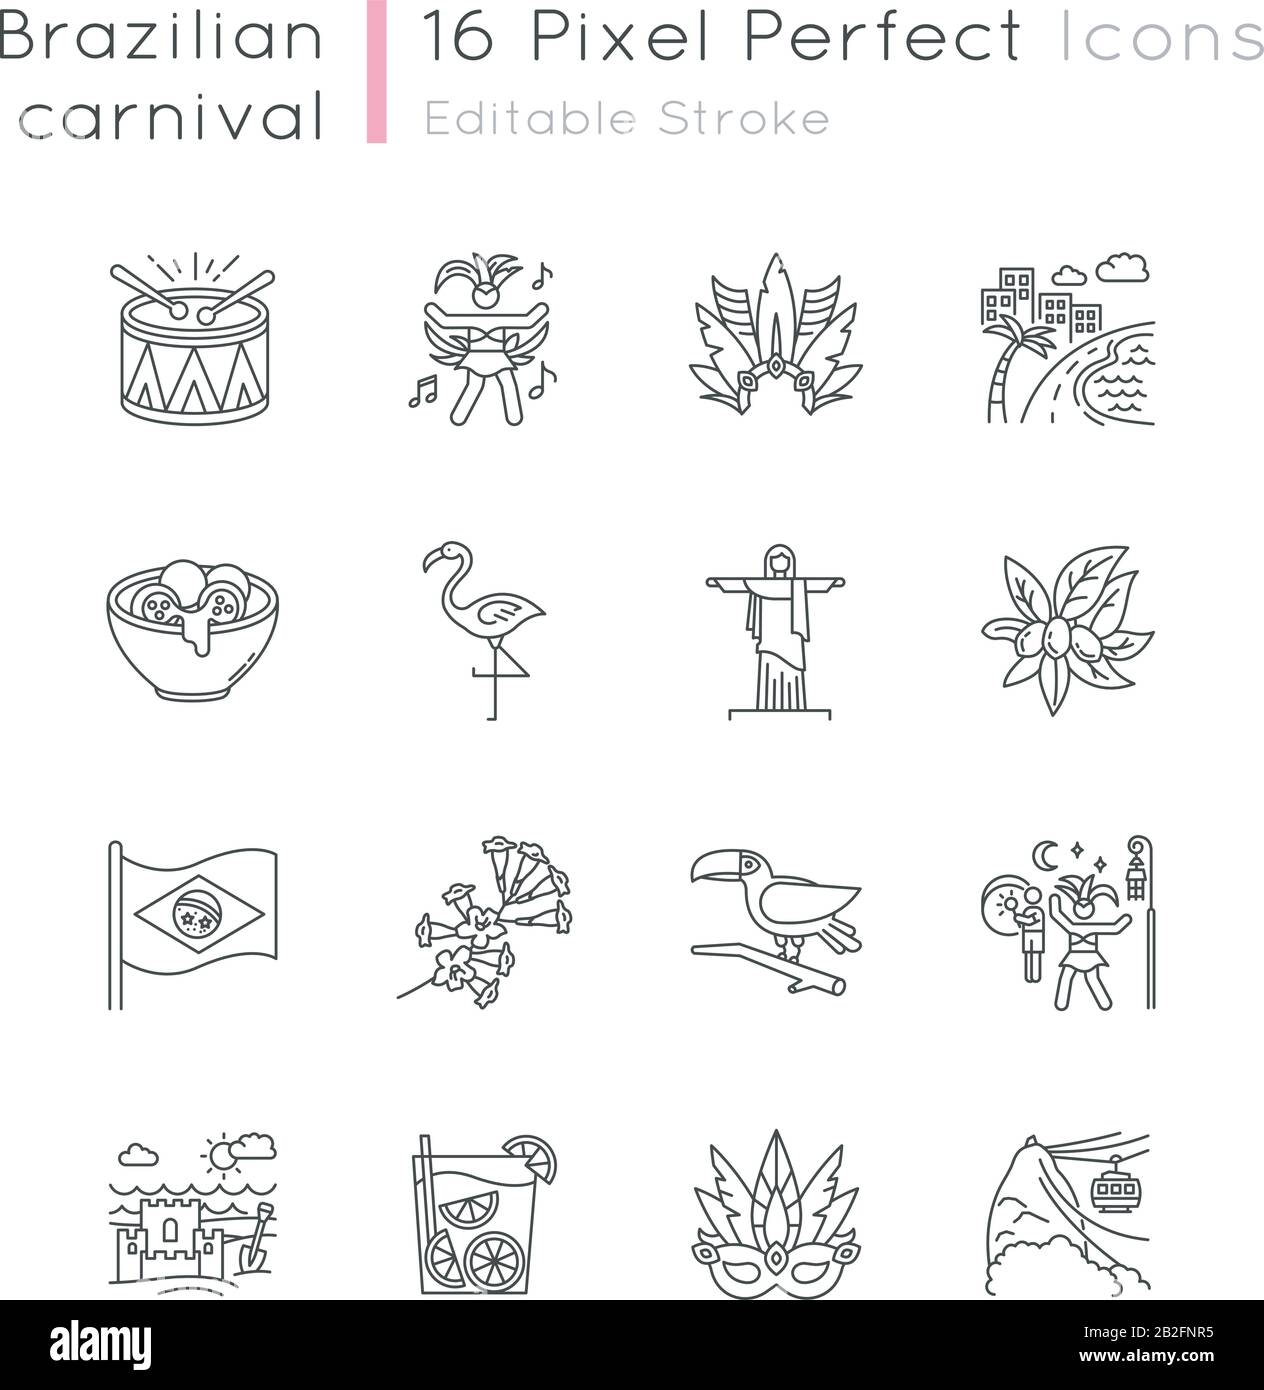 Brazilian carnival pixel perfect linear icons set. Street party. South America traditions. Flamingo. Customizable thin line contour symbols Stock Vector